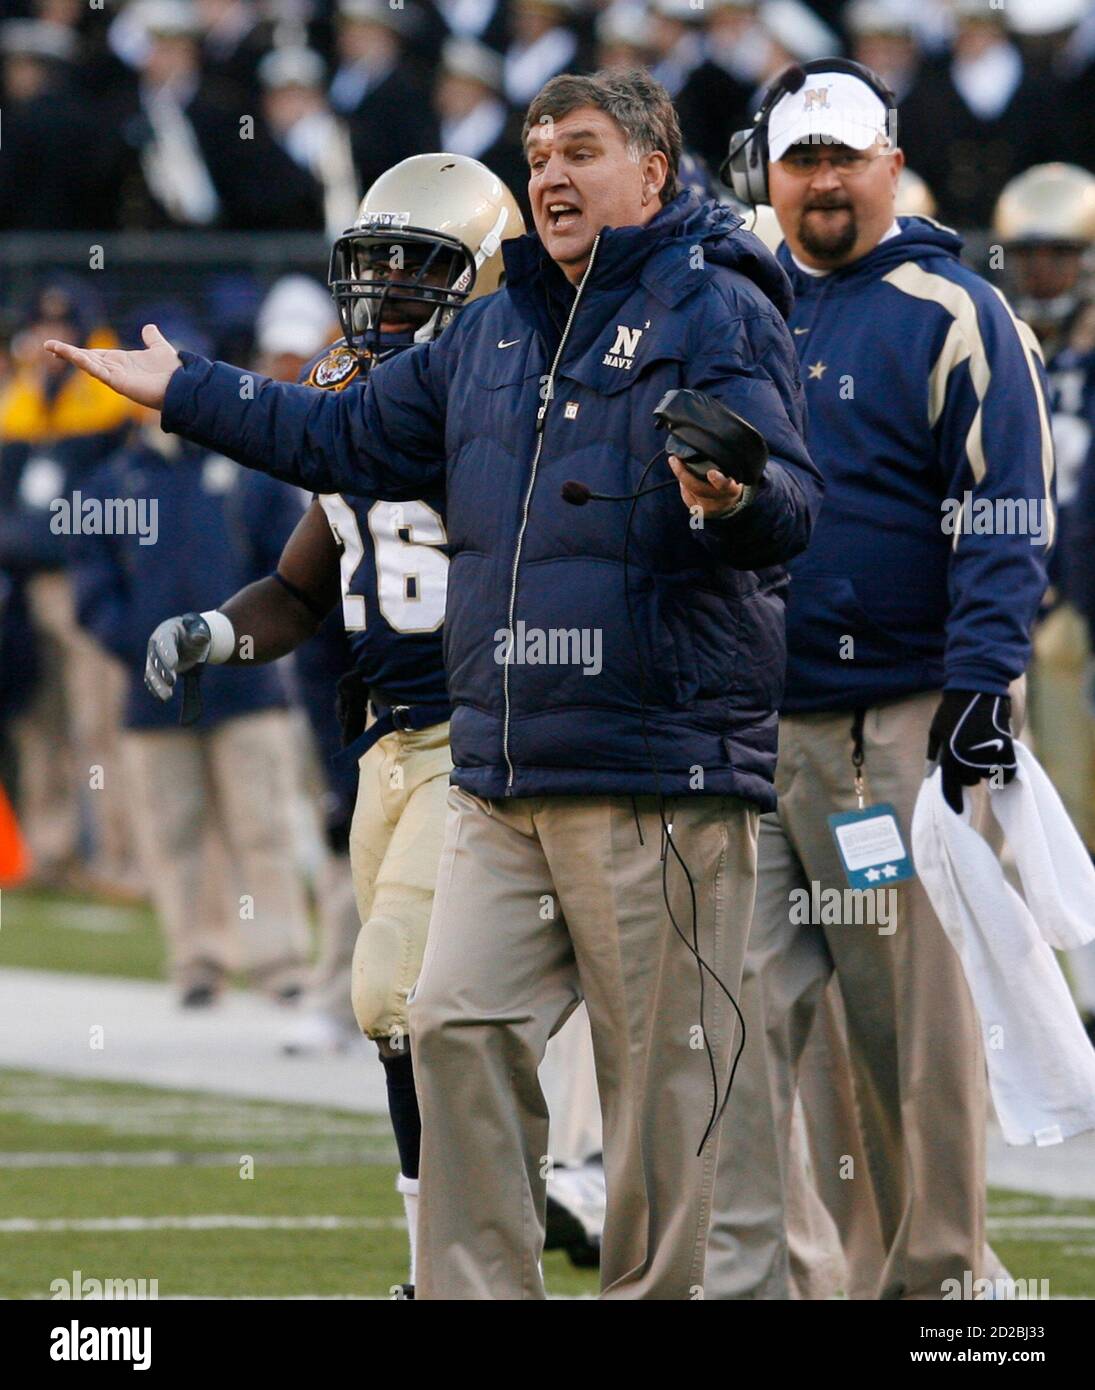 Navy head coach Paul Johnson (C) shouts instructions to his team during  fourth quarter action of the 108th Army versus Navy NCAA college football  game in Baltimore, Maryland, December 1, 2007. REUTERS/Tim